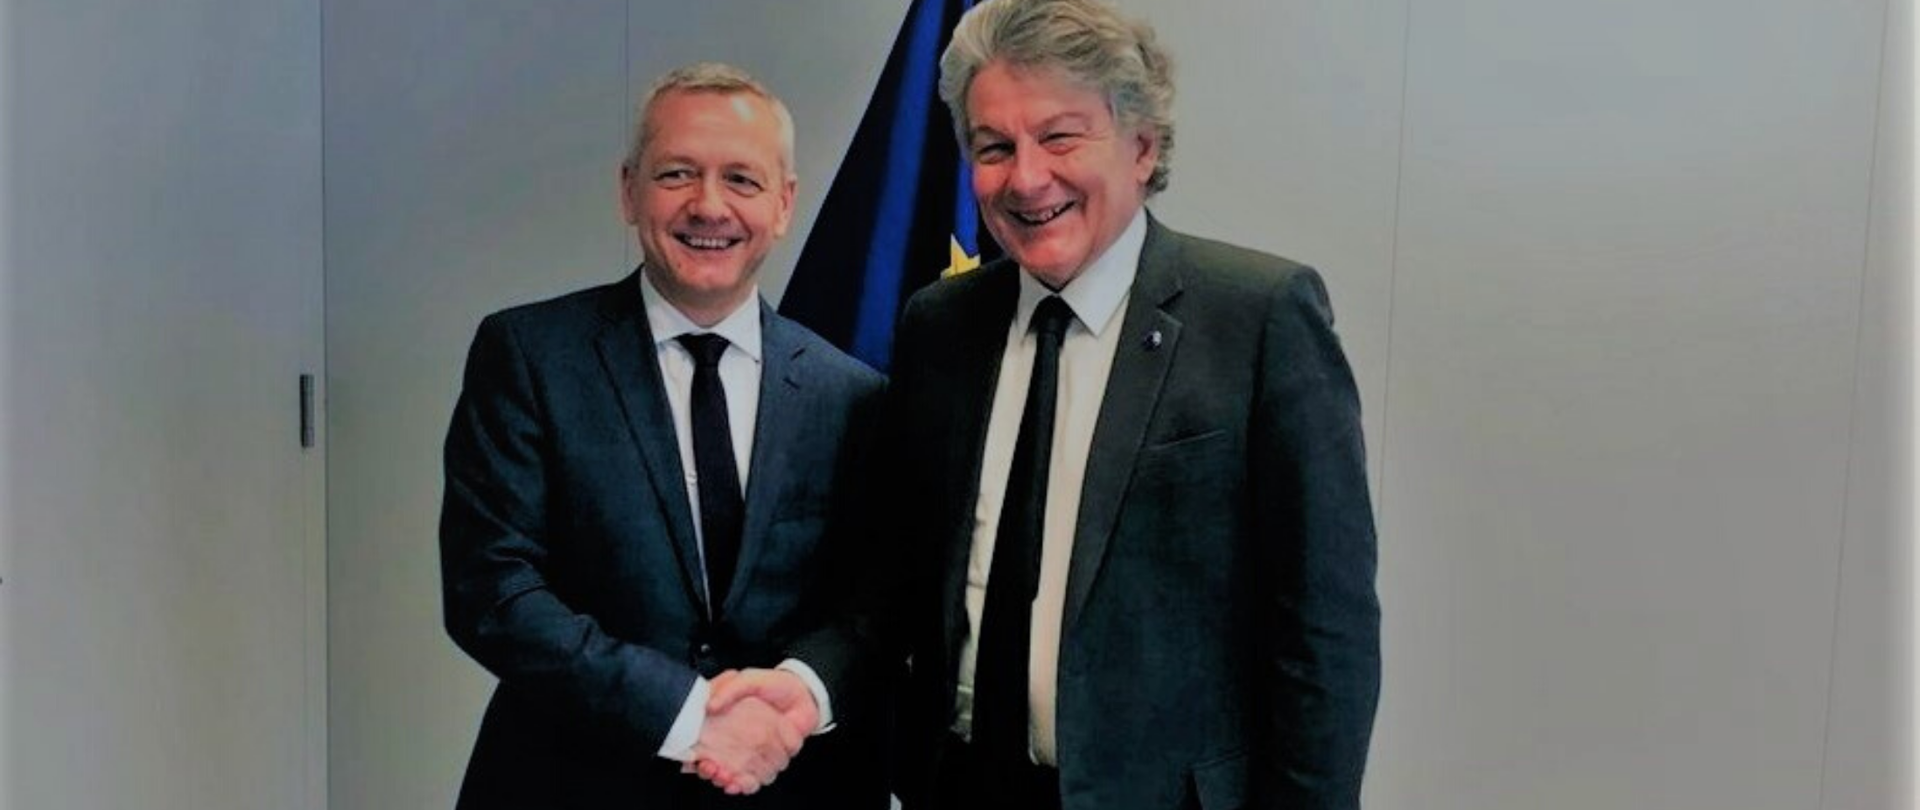 Minister Marek Zagórski and EU Commissioner Thierry Breton pose for a photo shaking hands against the background of the EU flag